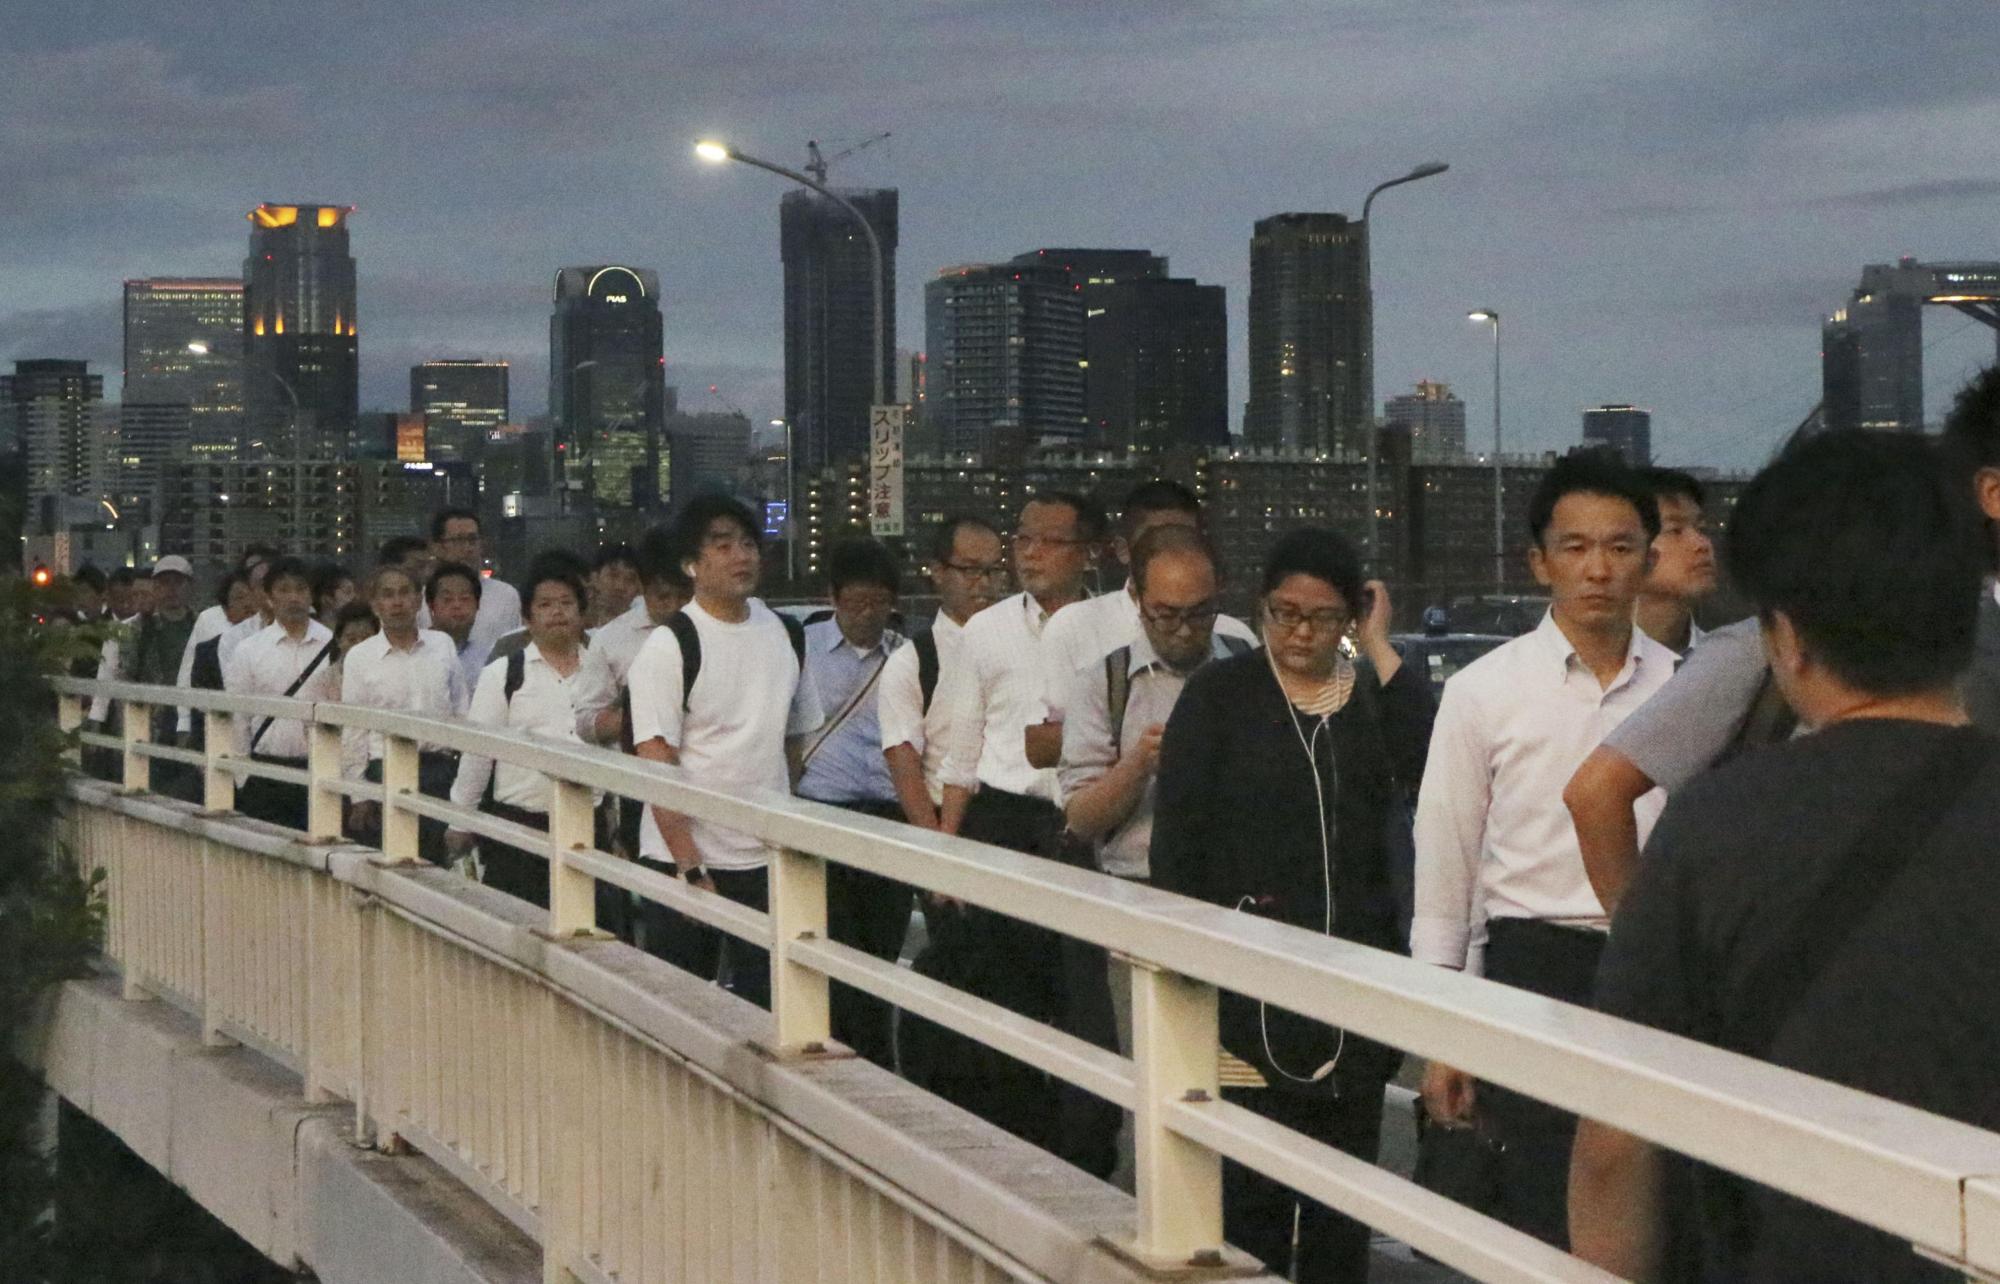 Pedestrians crowd the Shin-Yodogawa Bridge in Osaka on the evening of June 18 after public transportation services were disrupted by the major earthquake that hit the region earlier in the day. | KYODO